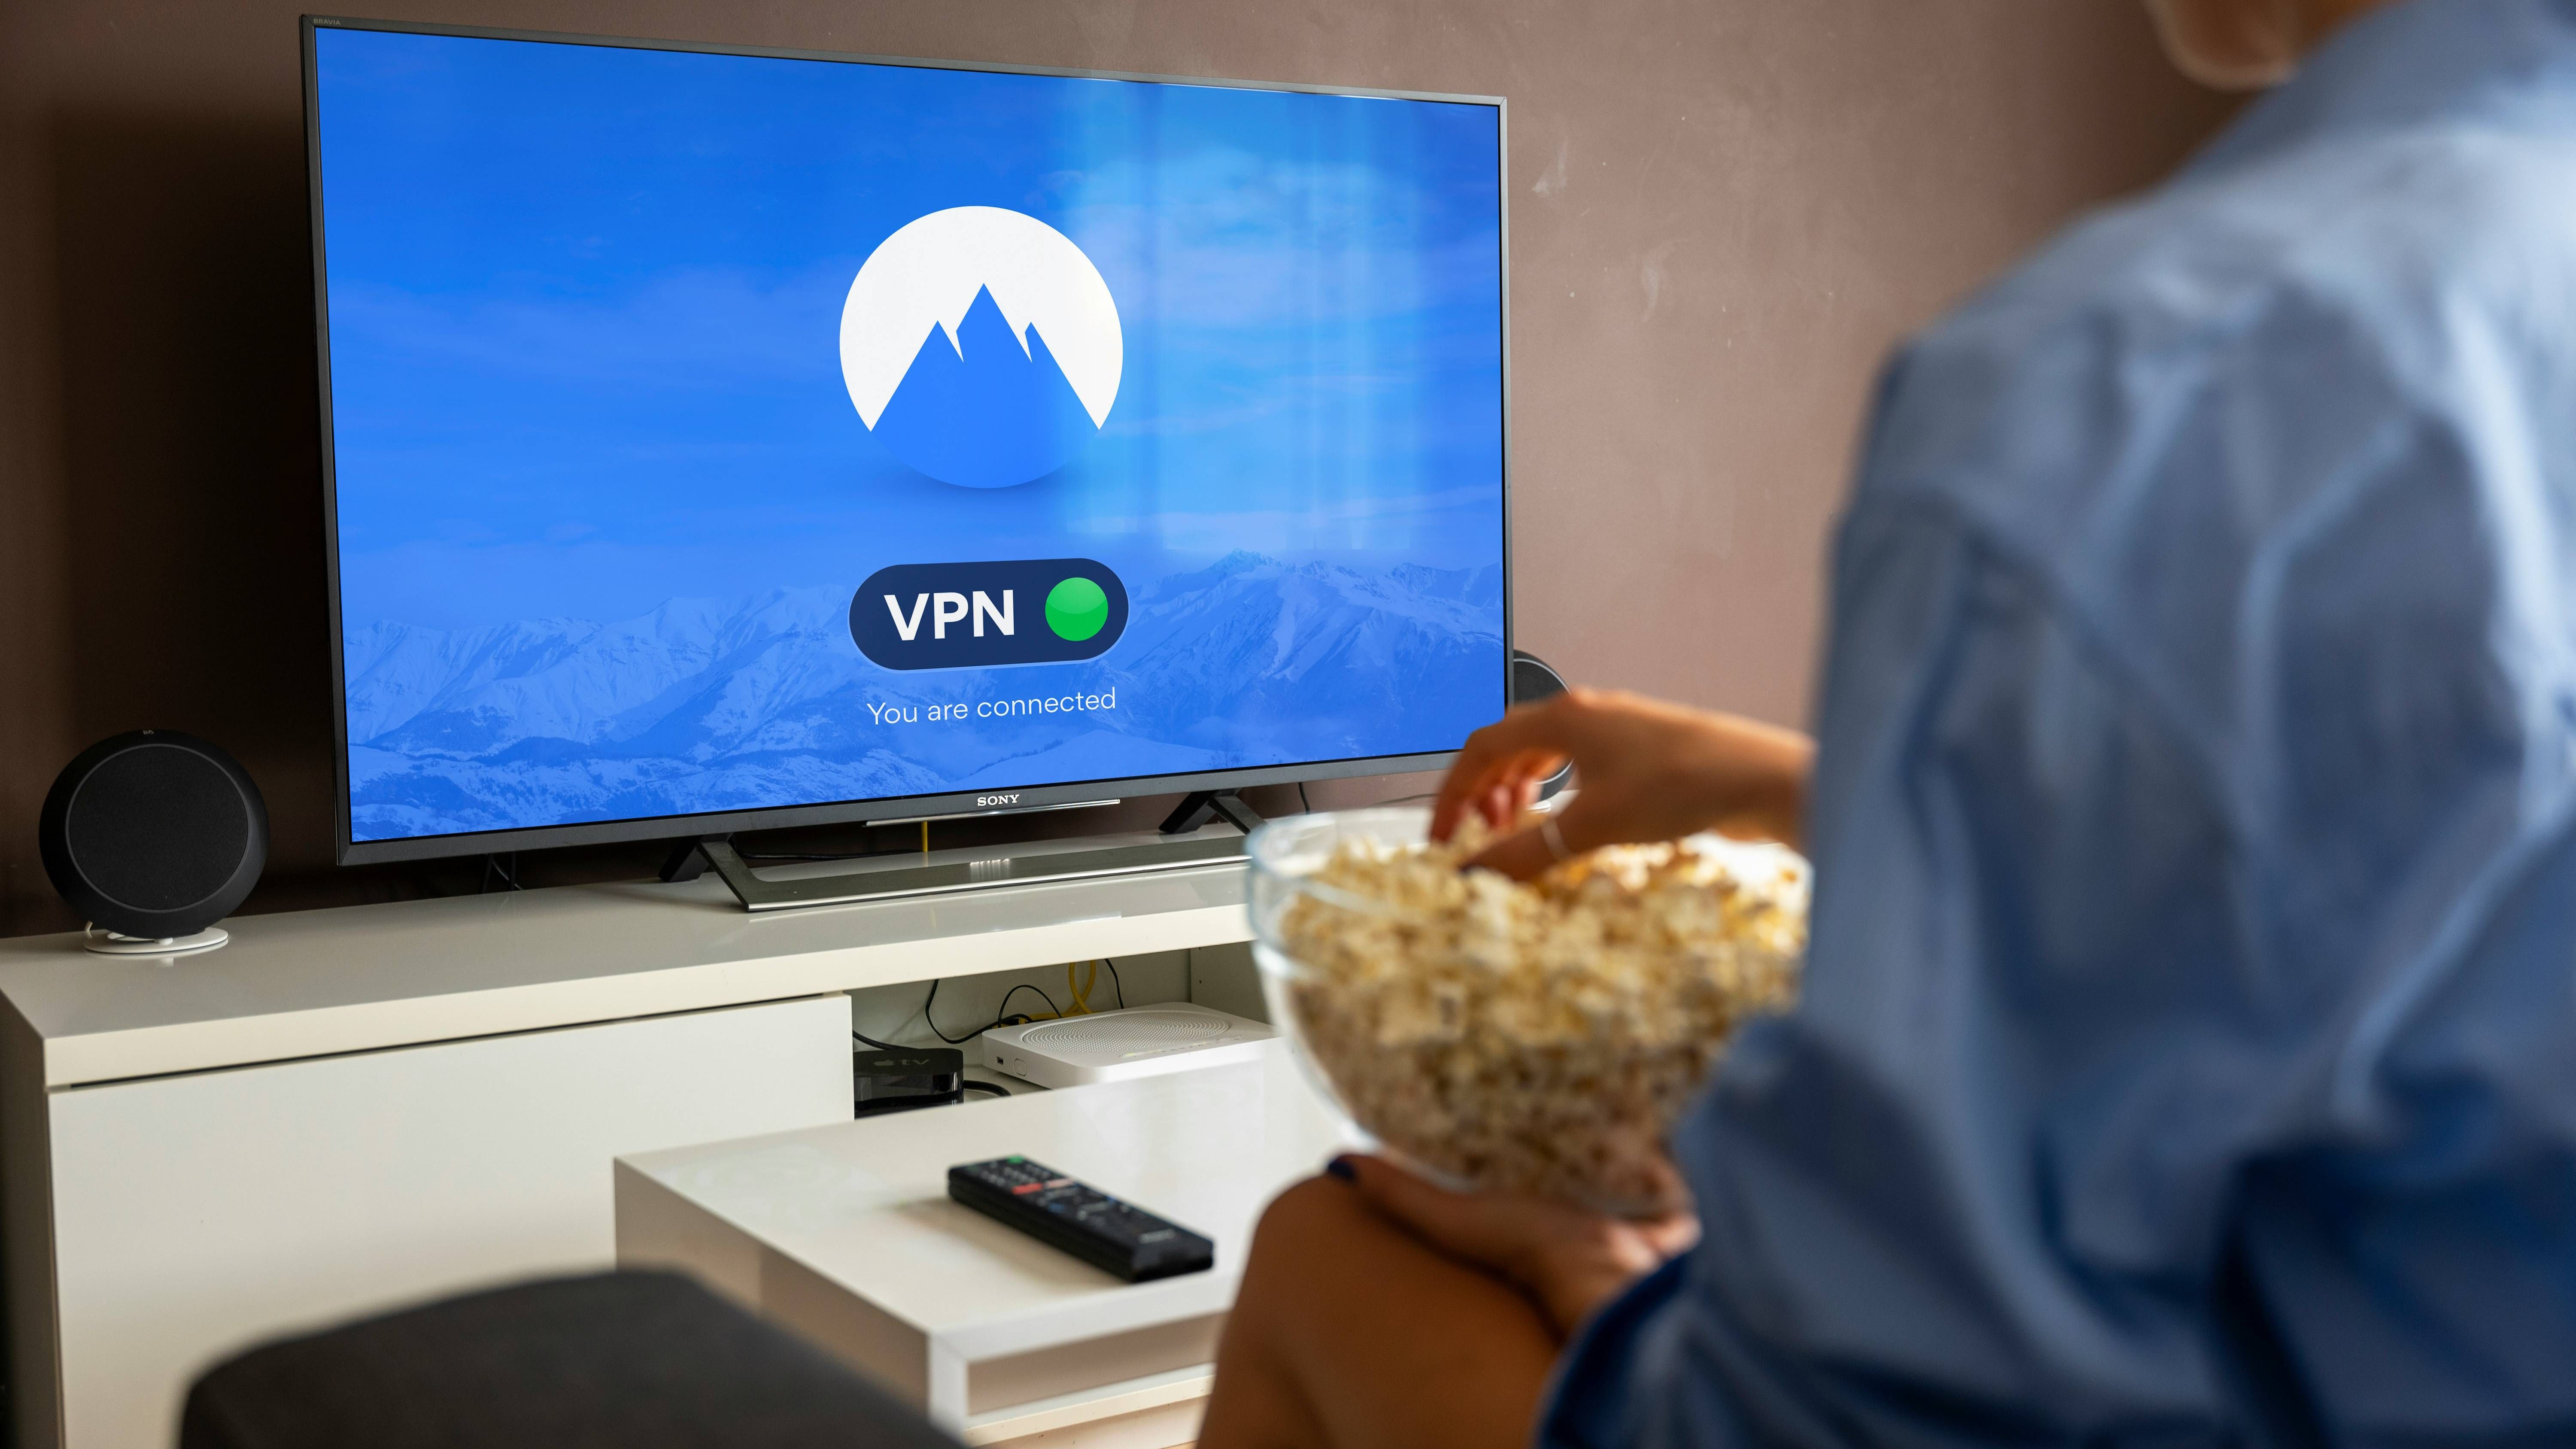 Person with popcorn watching black flat screen tv turned on display VPN connected